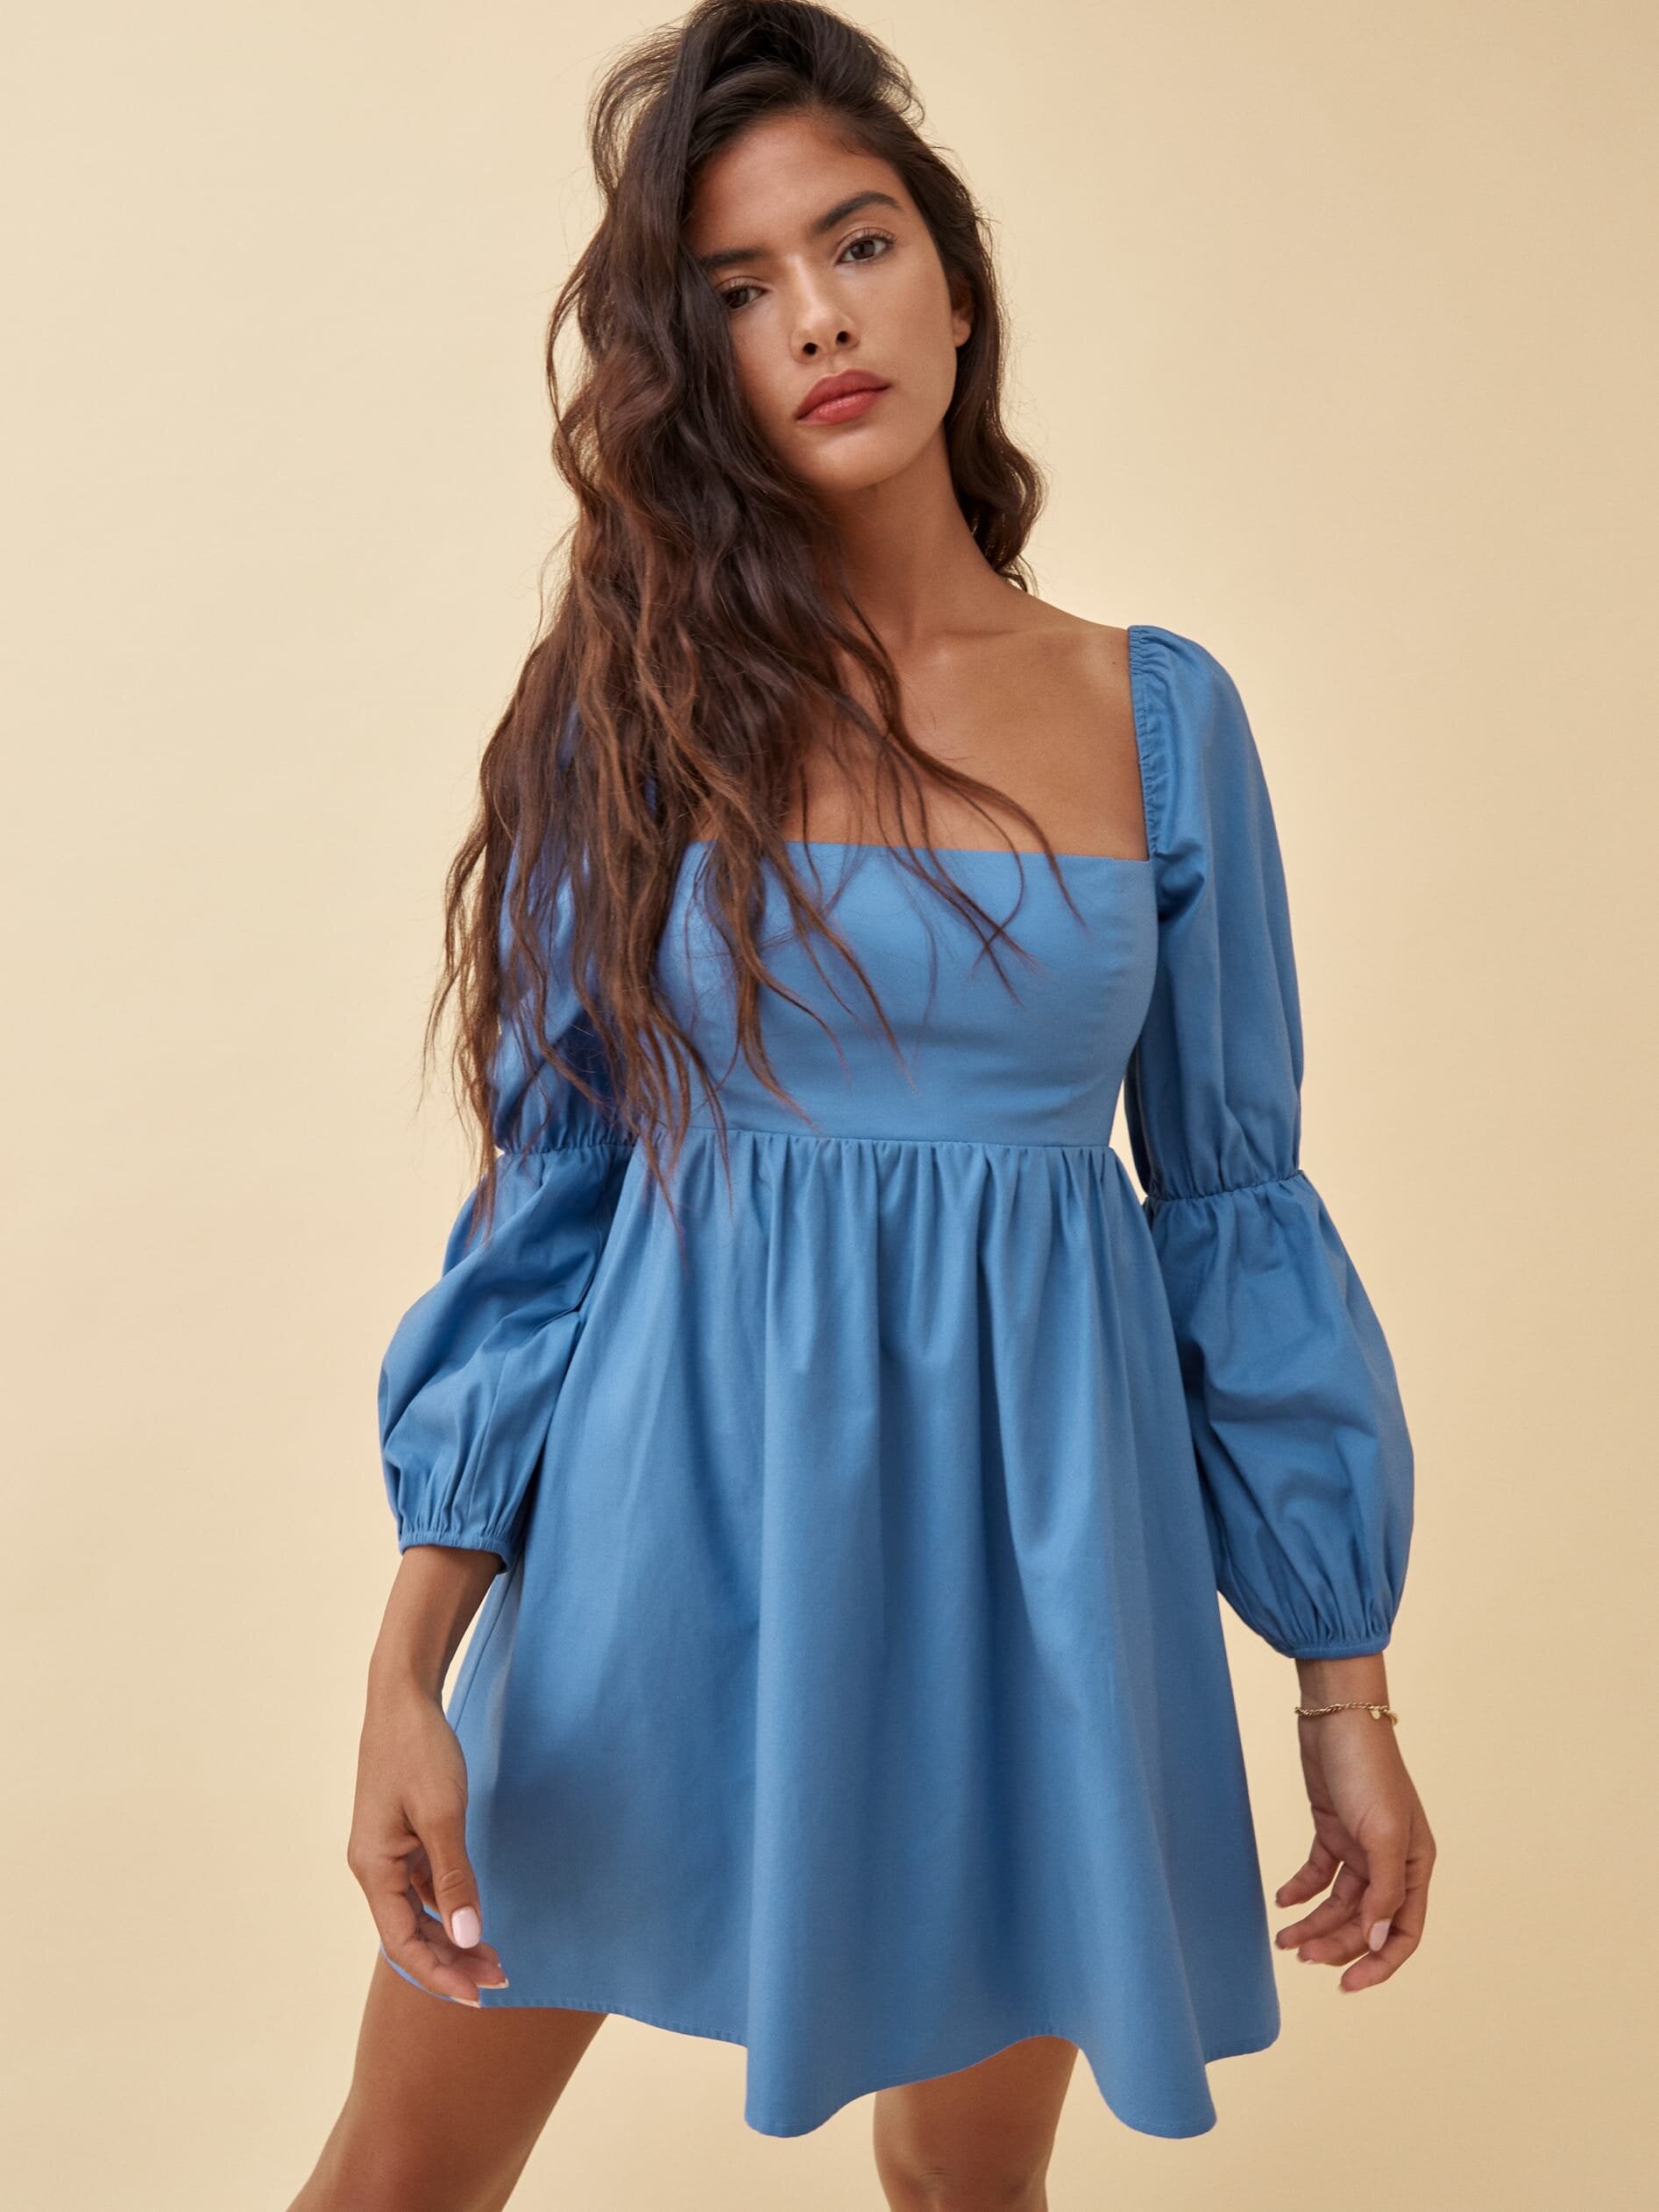 31 Dresses With Delightfully Puffed Sleeves